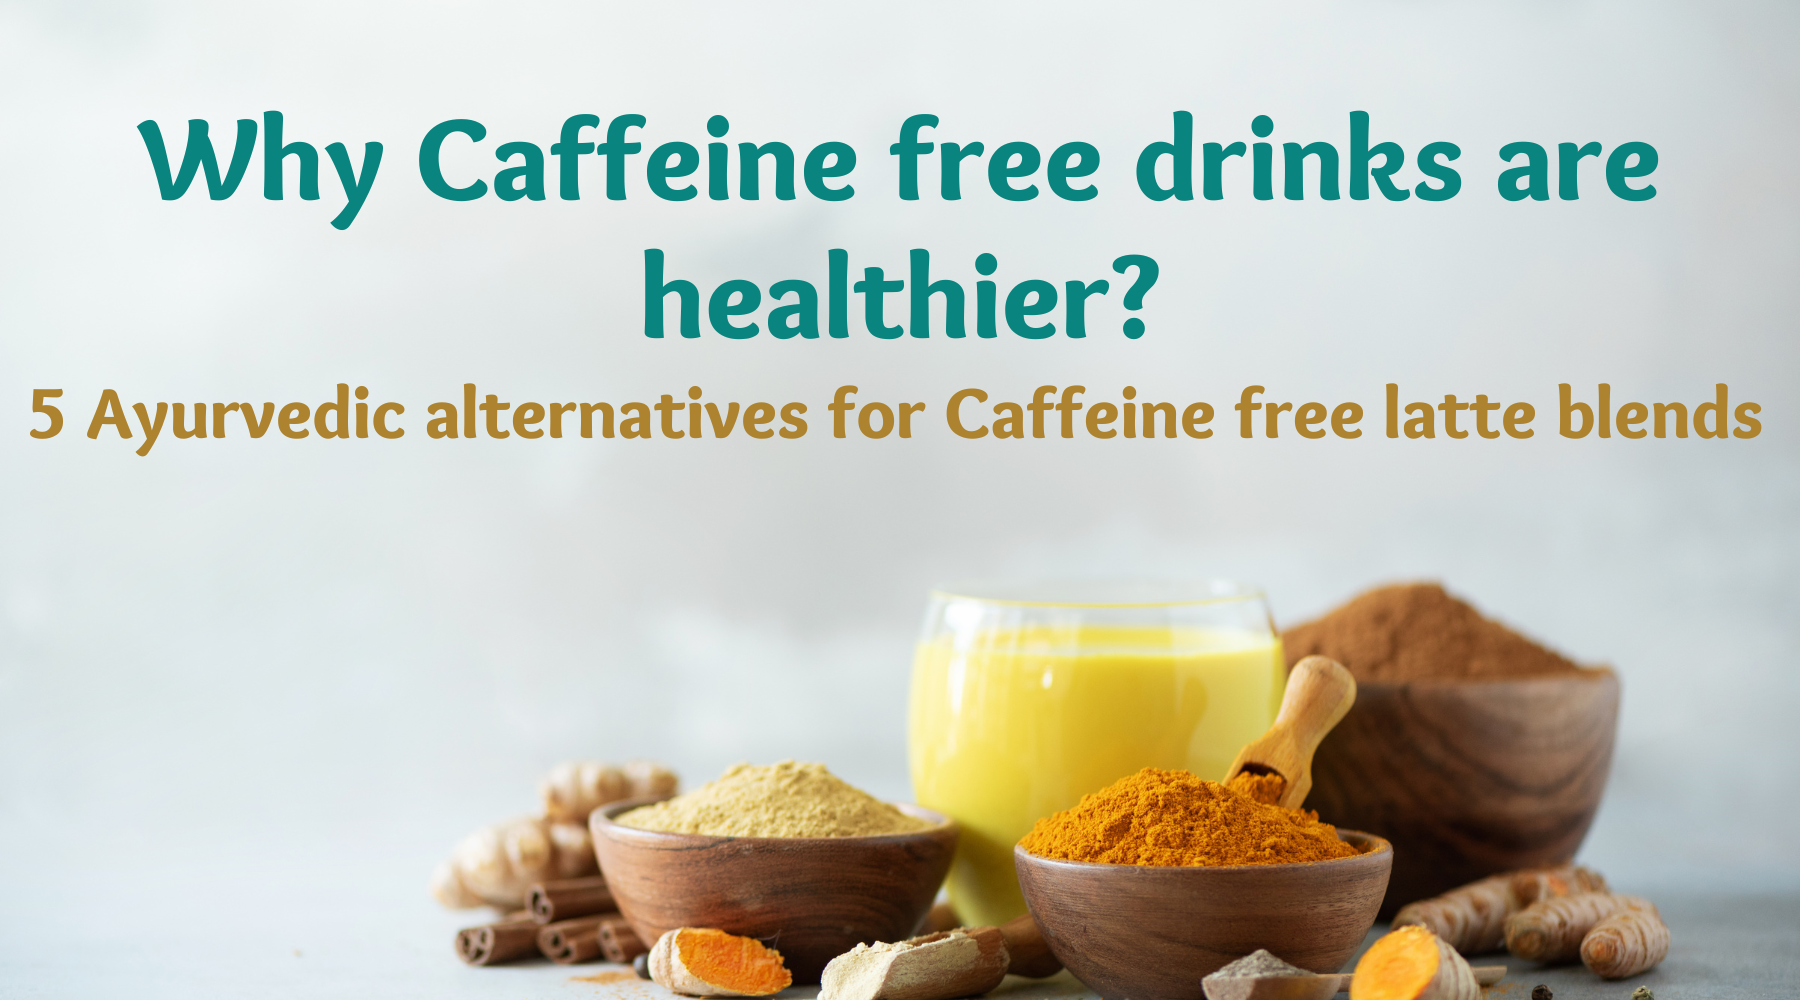 Why Caffeine free drinks are healthier?